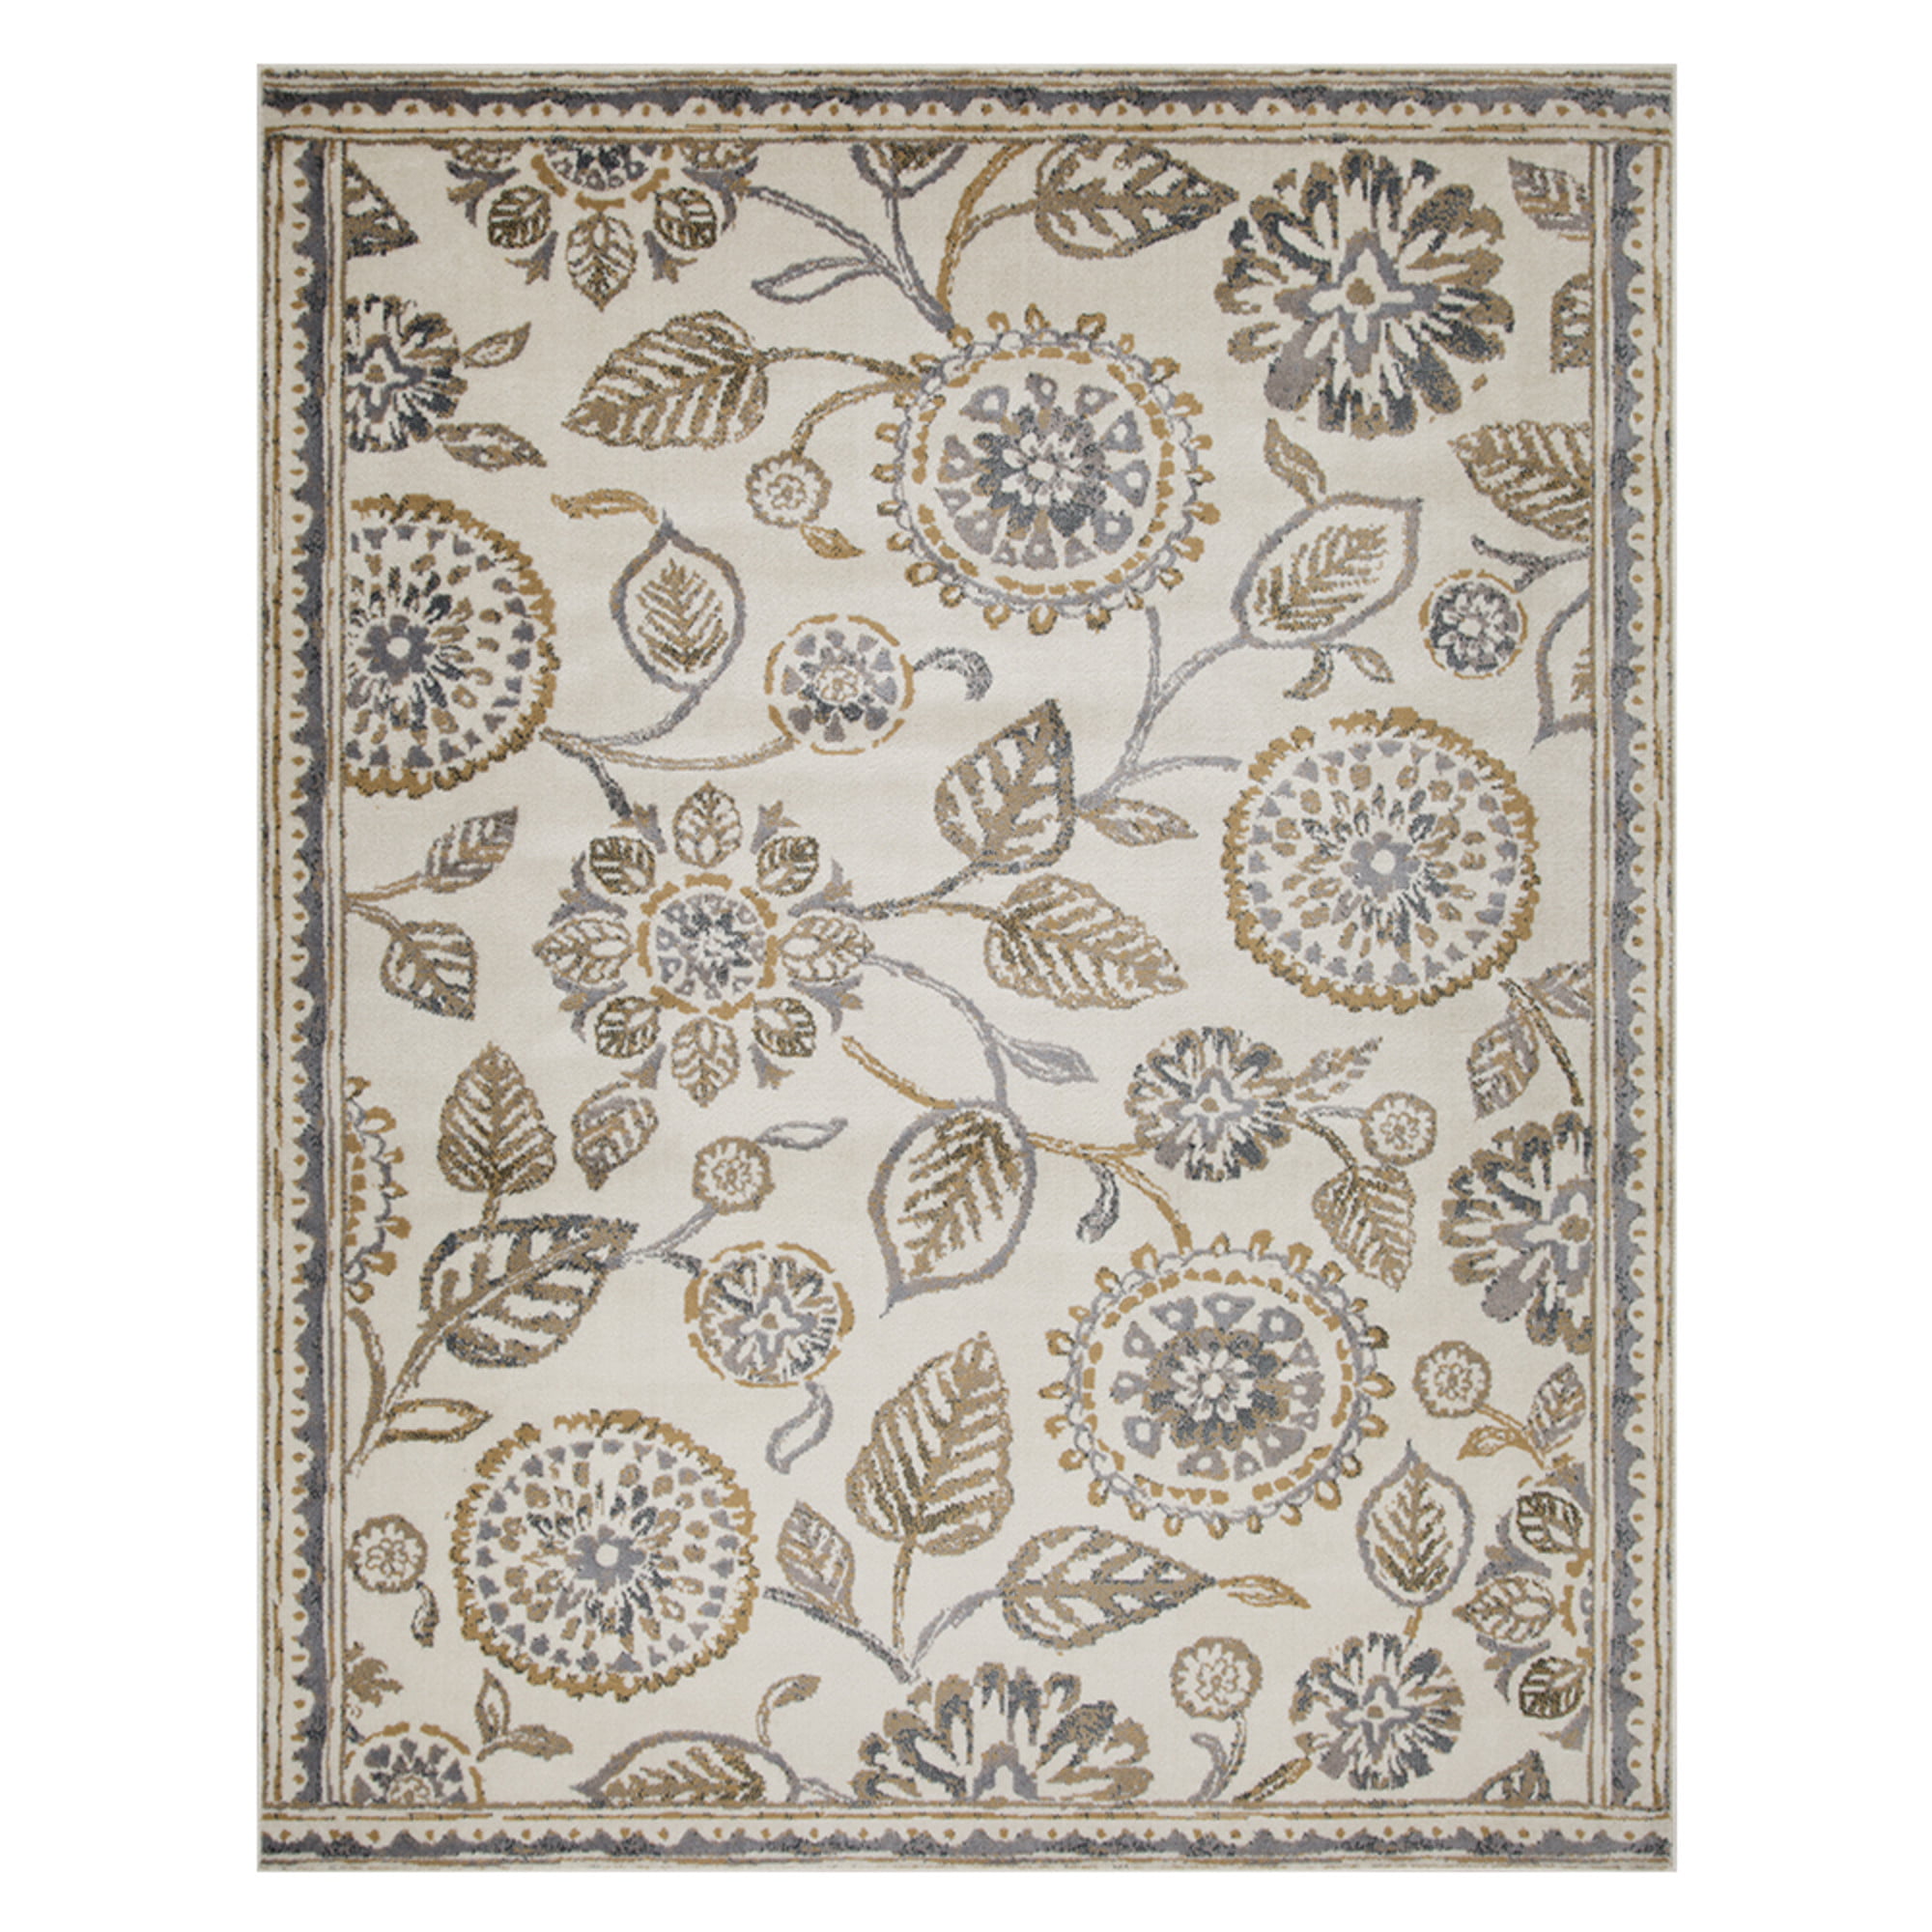 5' Square, Sea Mist Ortley Indoor Outdoor Pattern Area Rugs 